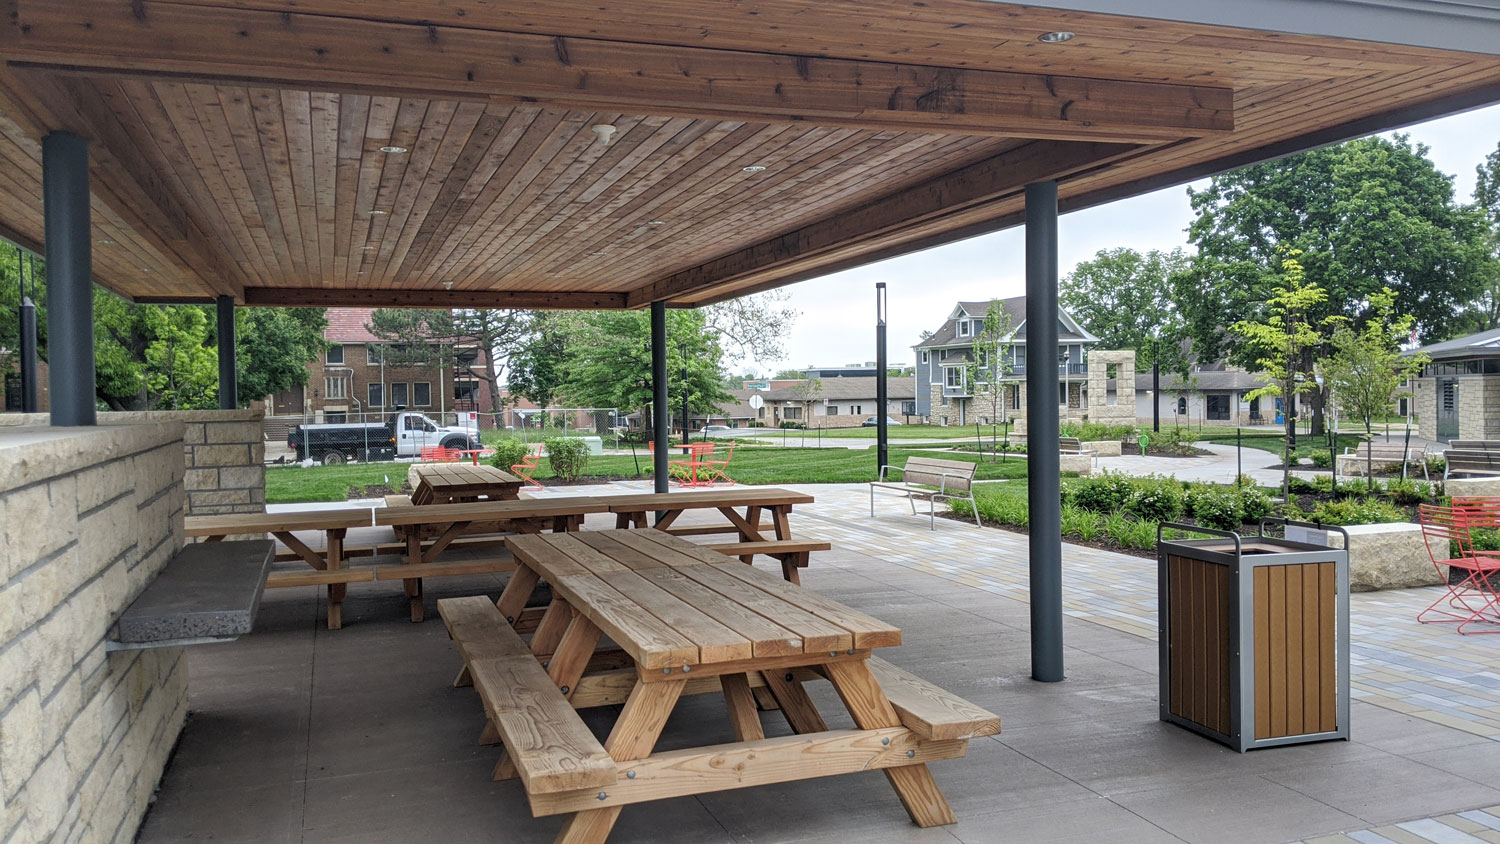 This is an image of downtown overland park thompson park large shelter picnic table web